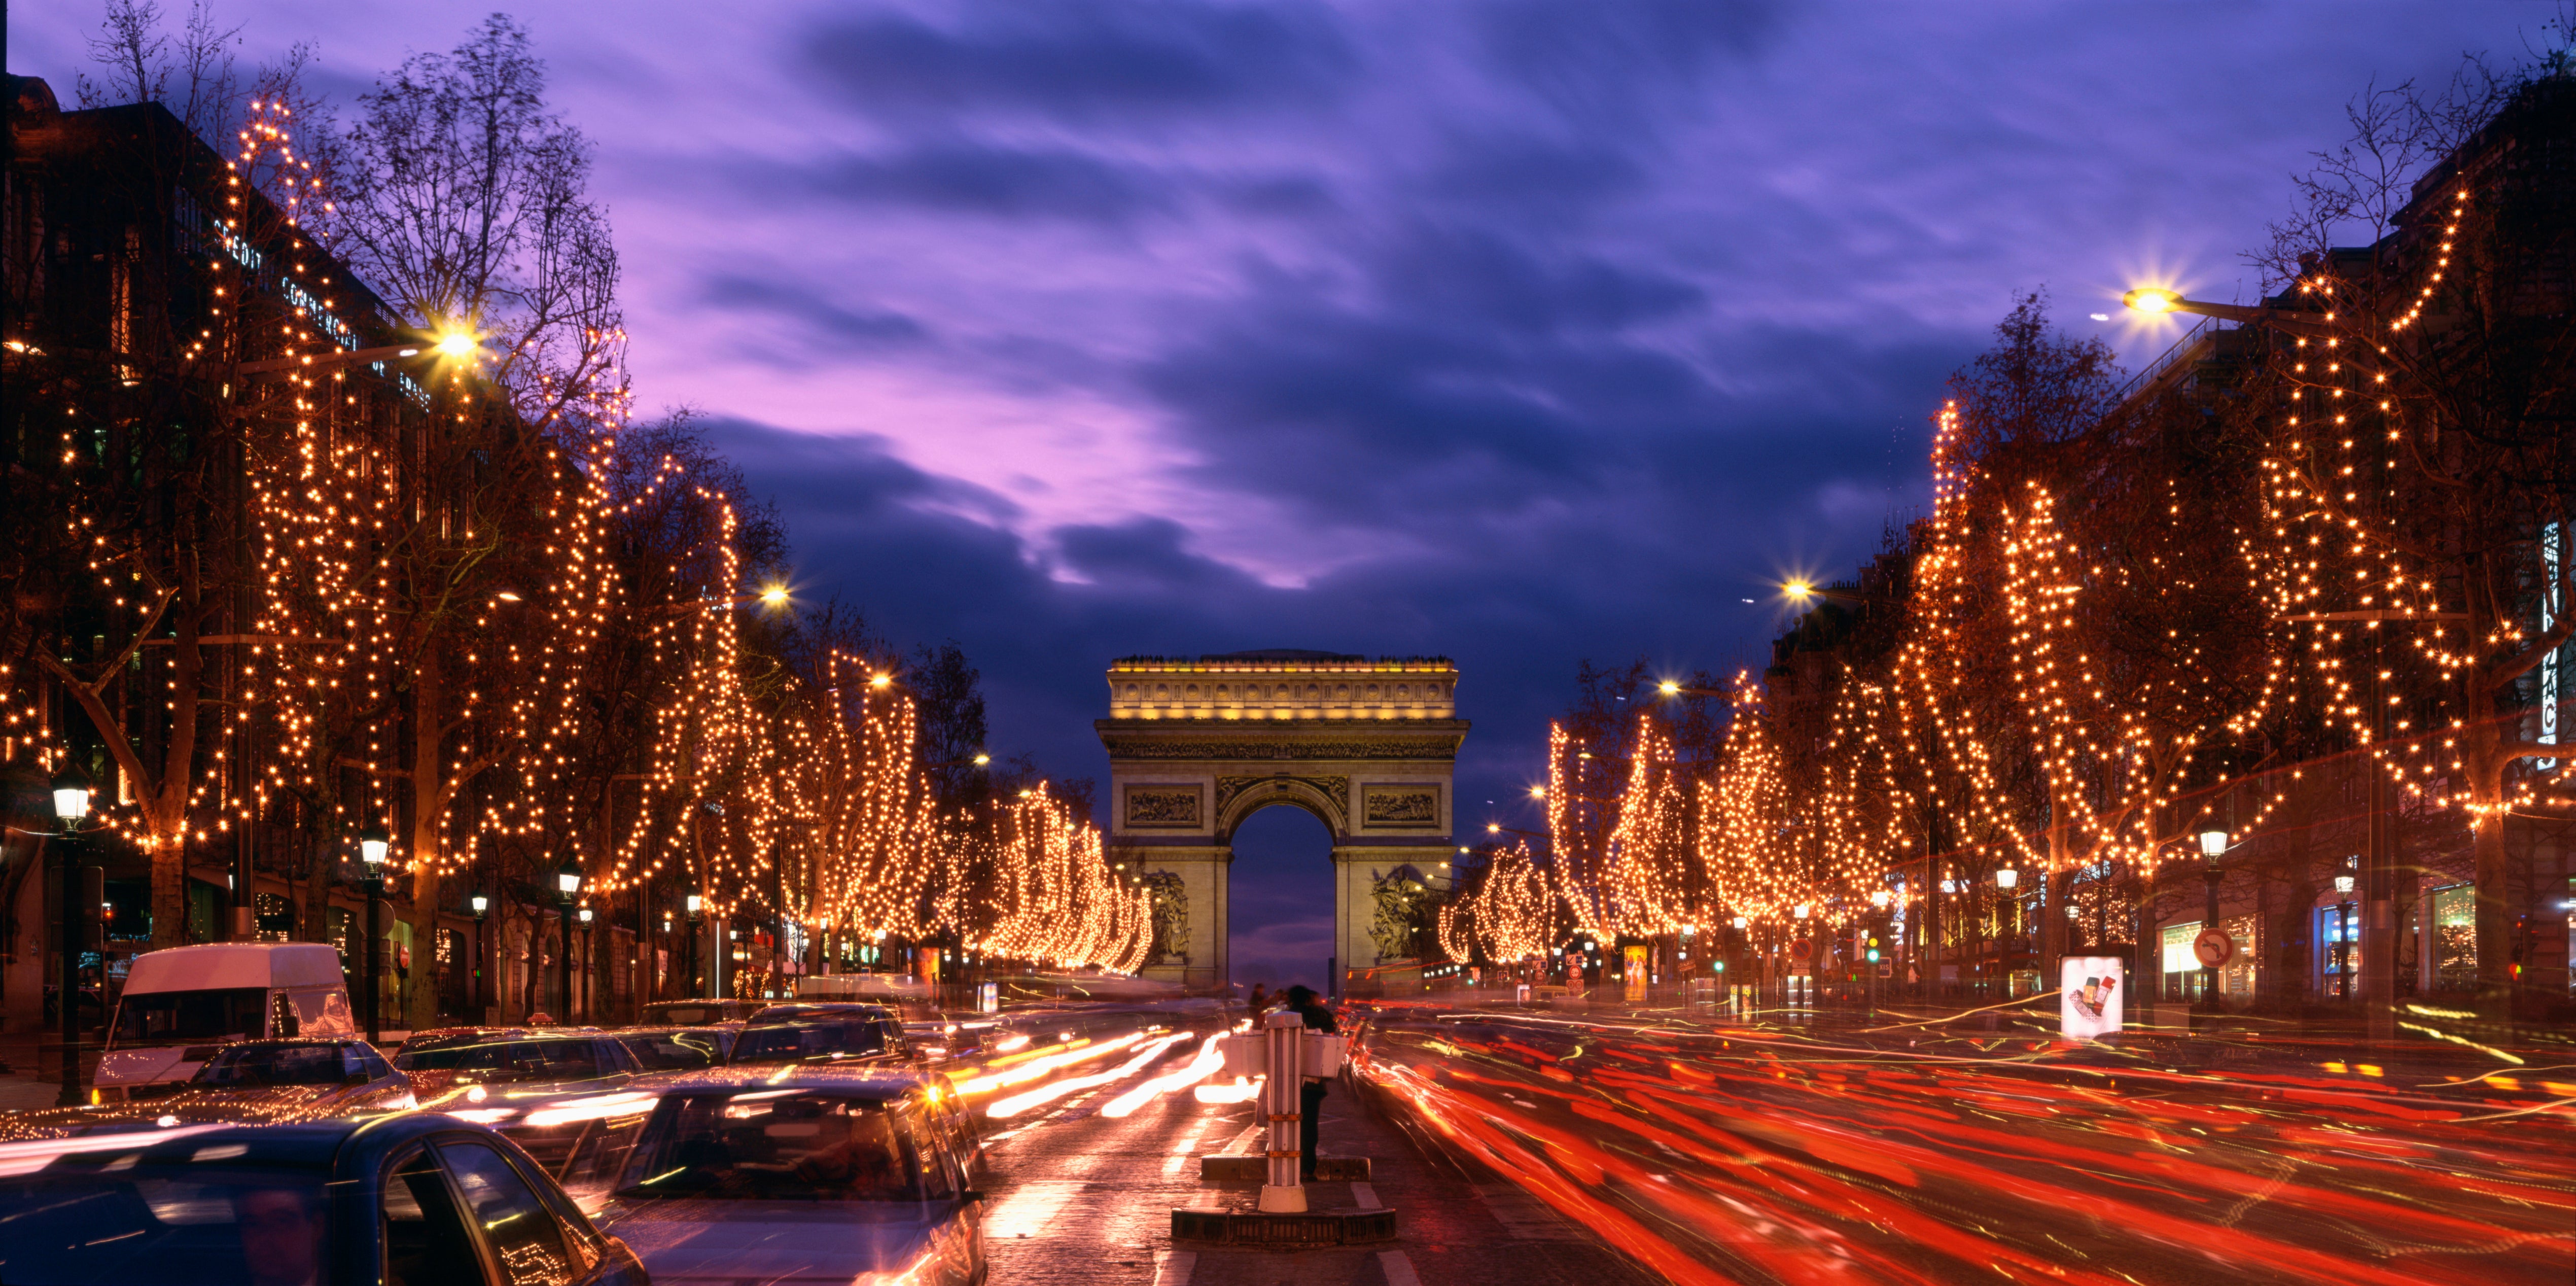 Who Says You Have To Be Home For The Holidays? The 5 Best International Destinations to Visit For Christmas
